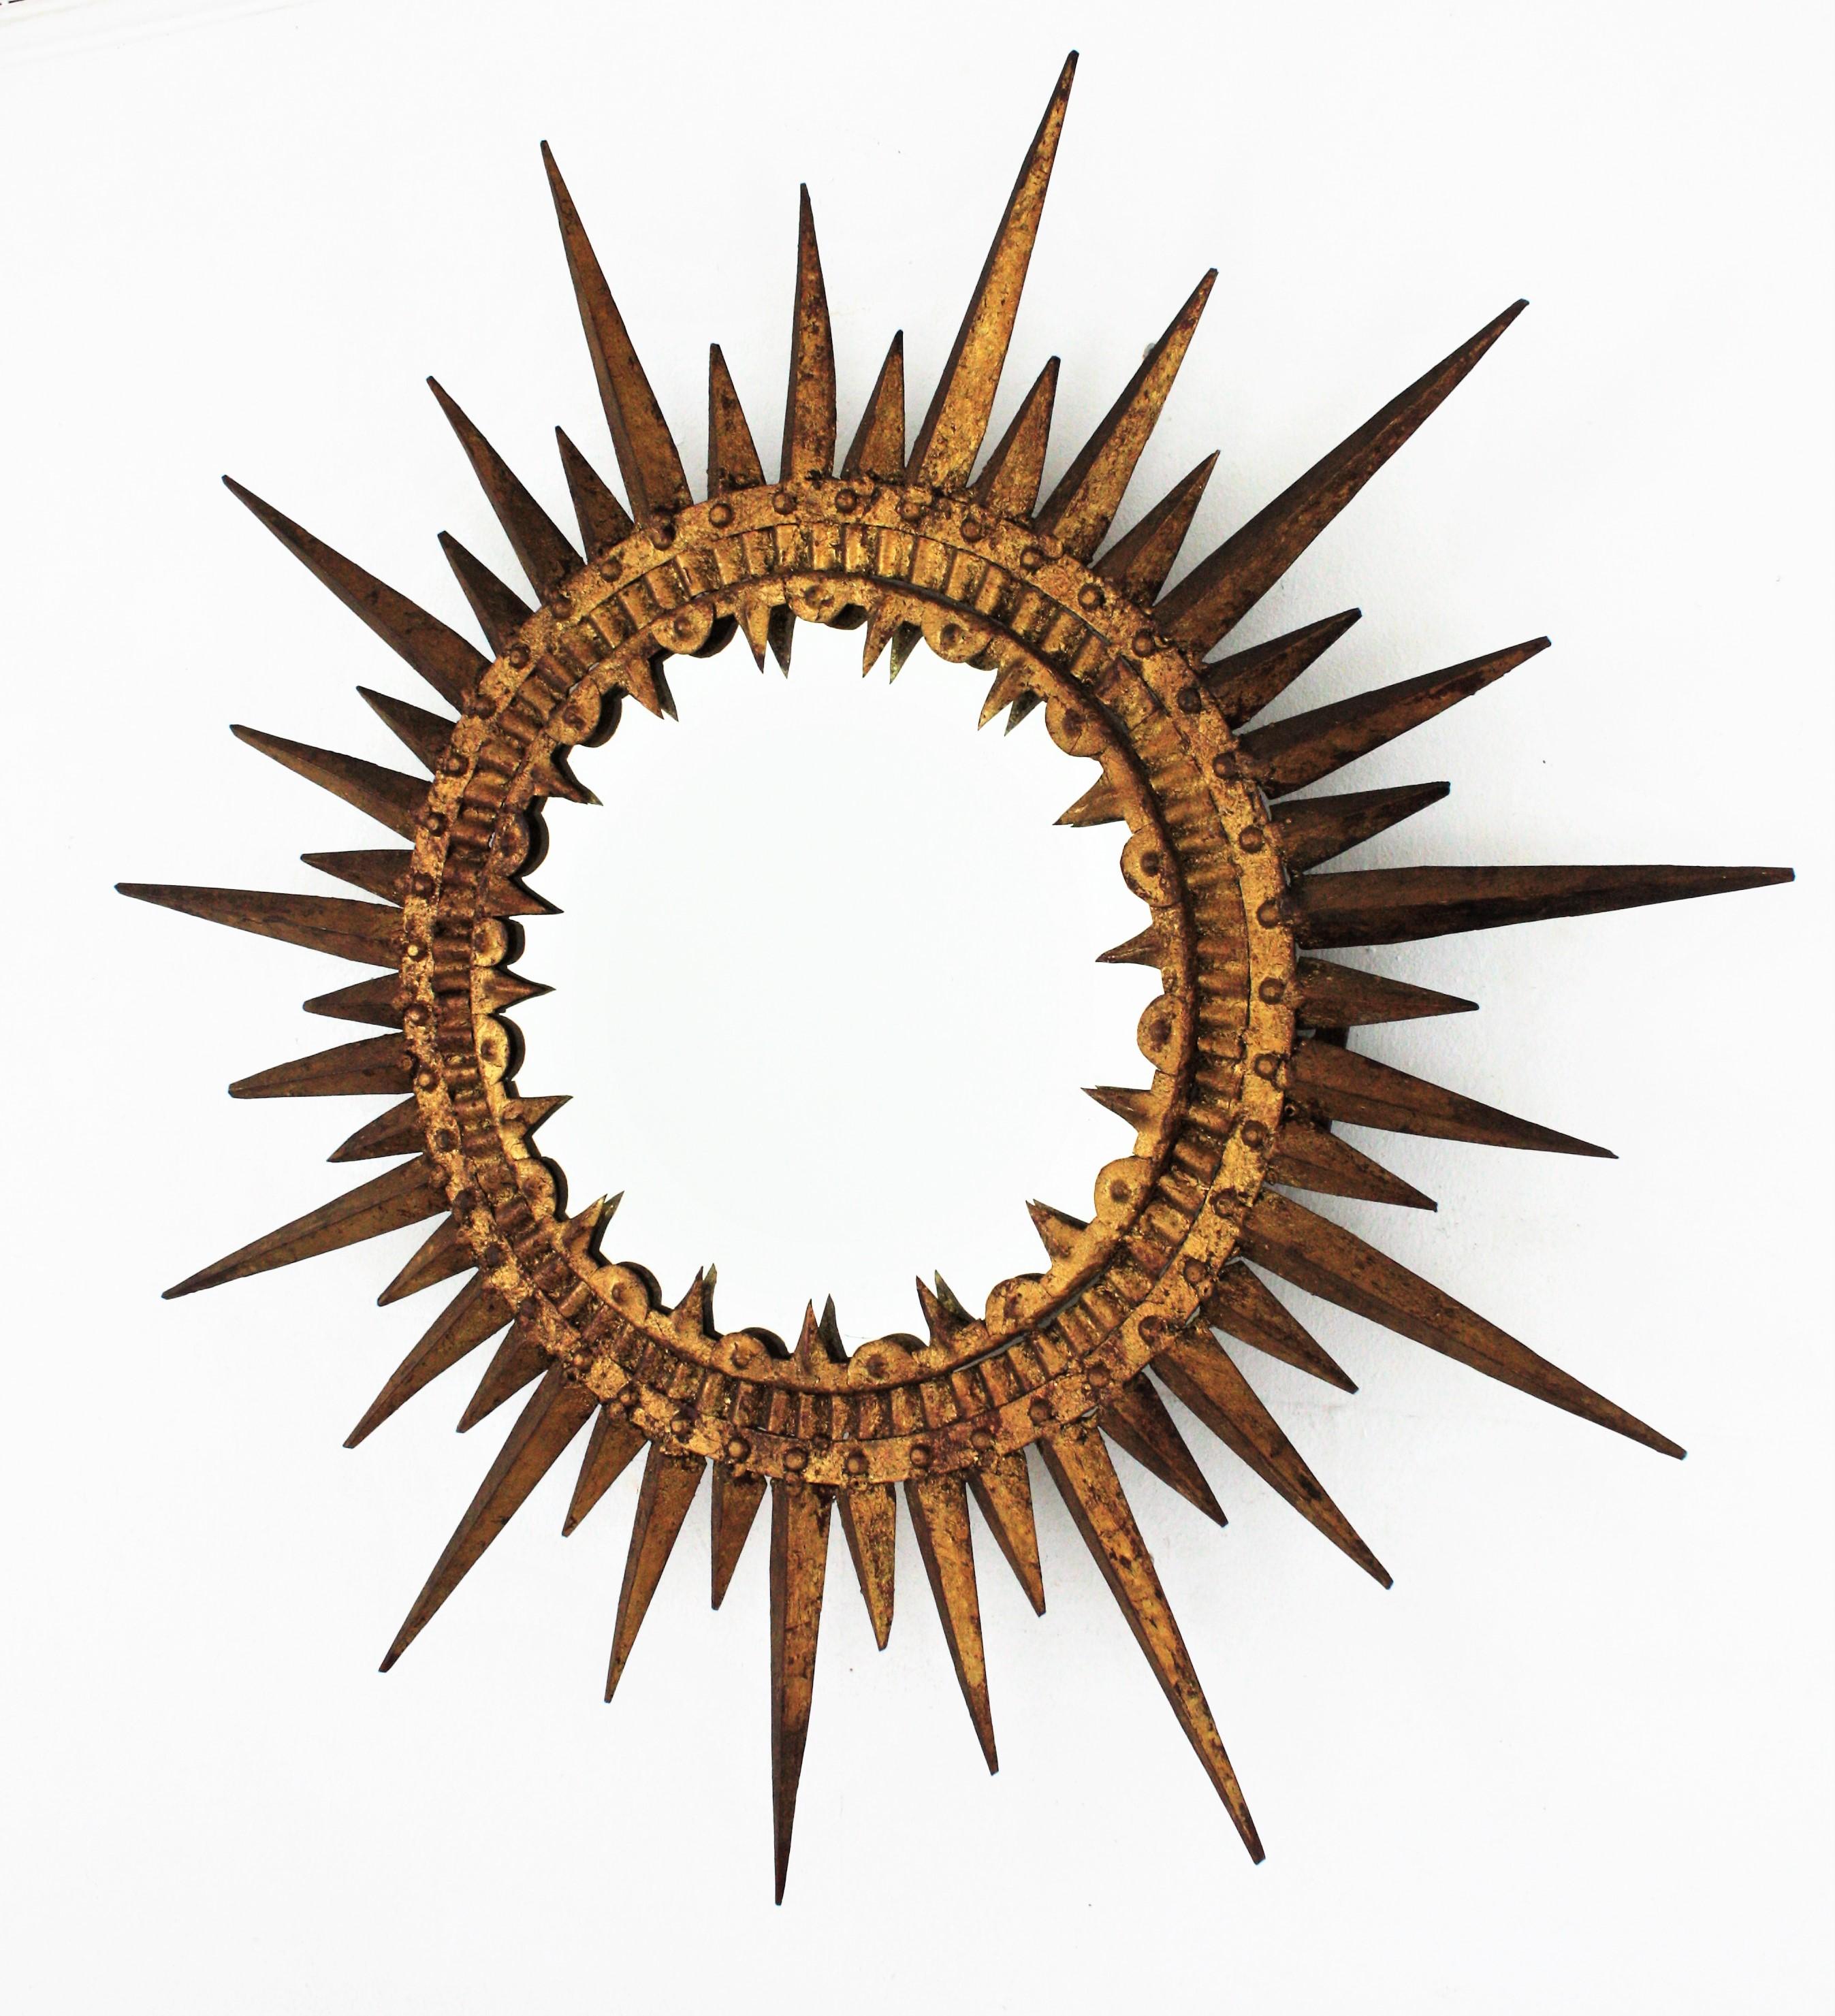 One of a kind wrought iron gold leaf gilded sunburst mirror, Spain, 1950s.
This hand-hammered sunburst mirror has a extremely detailed hammered work and was made entirely by hand. The sun shaped frame is richly adorned by pointed rays, nails